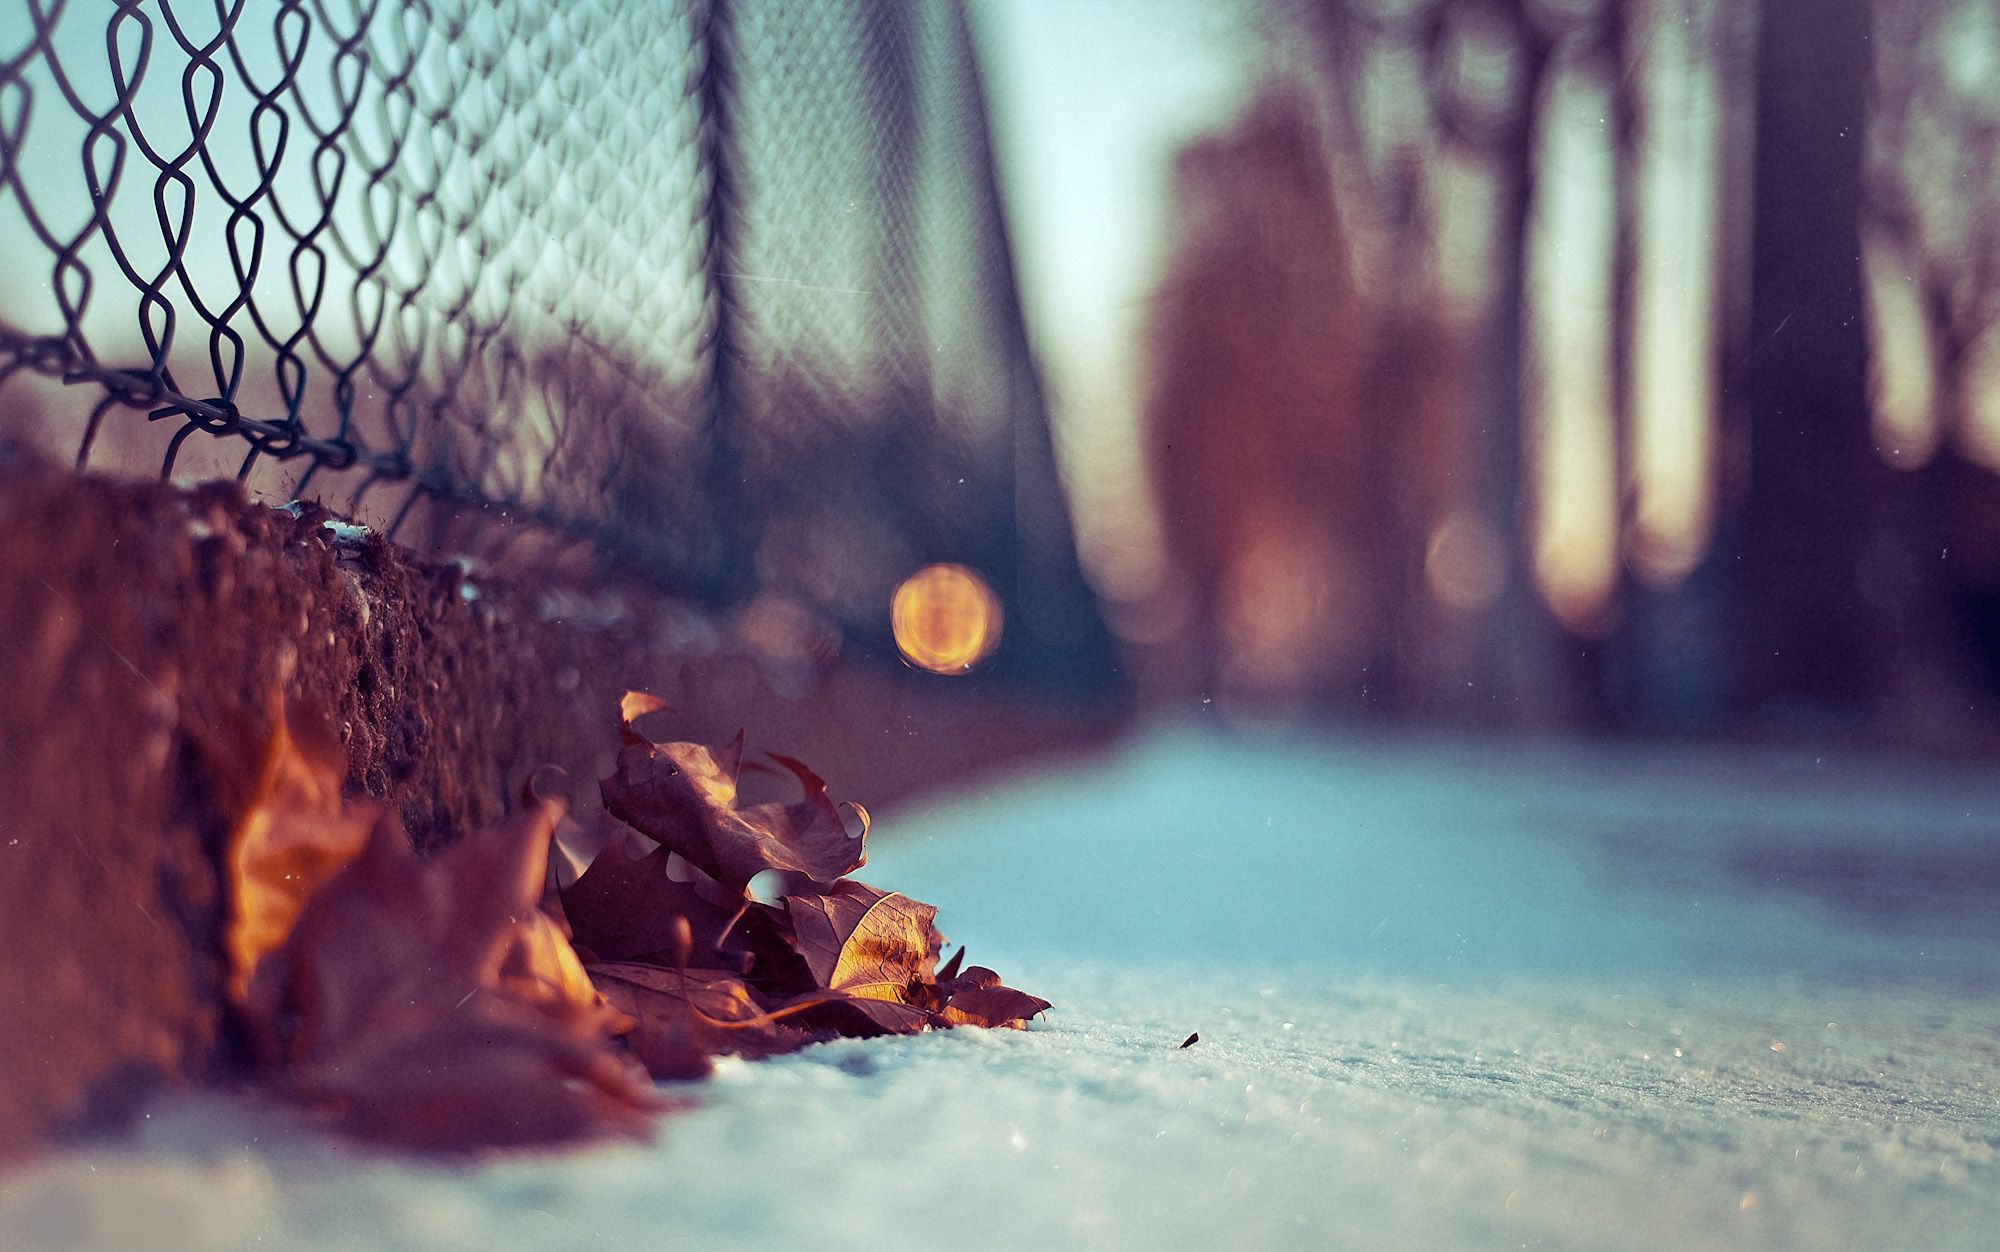 A fence covered in snow with a leaf in the foreground. - Macro